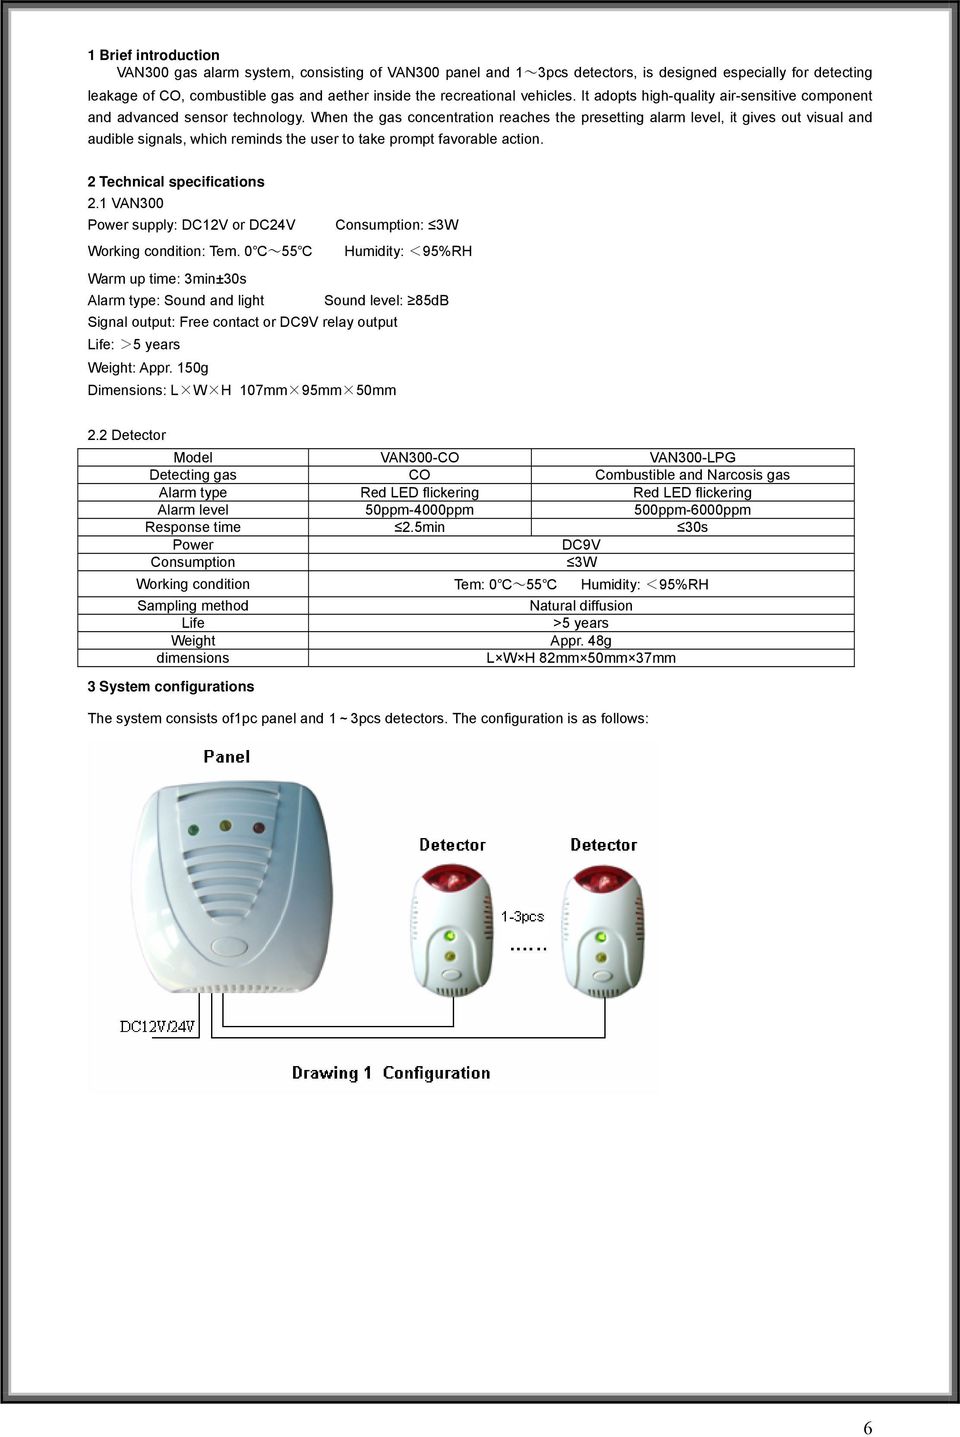 When the gas concentration reaches the presetting alarm level, it gives out visual and audible signals, which reminds the user to take prompt favorable action. 2 Technical specifications 2.